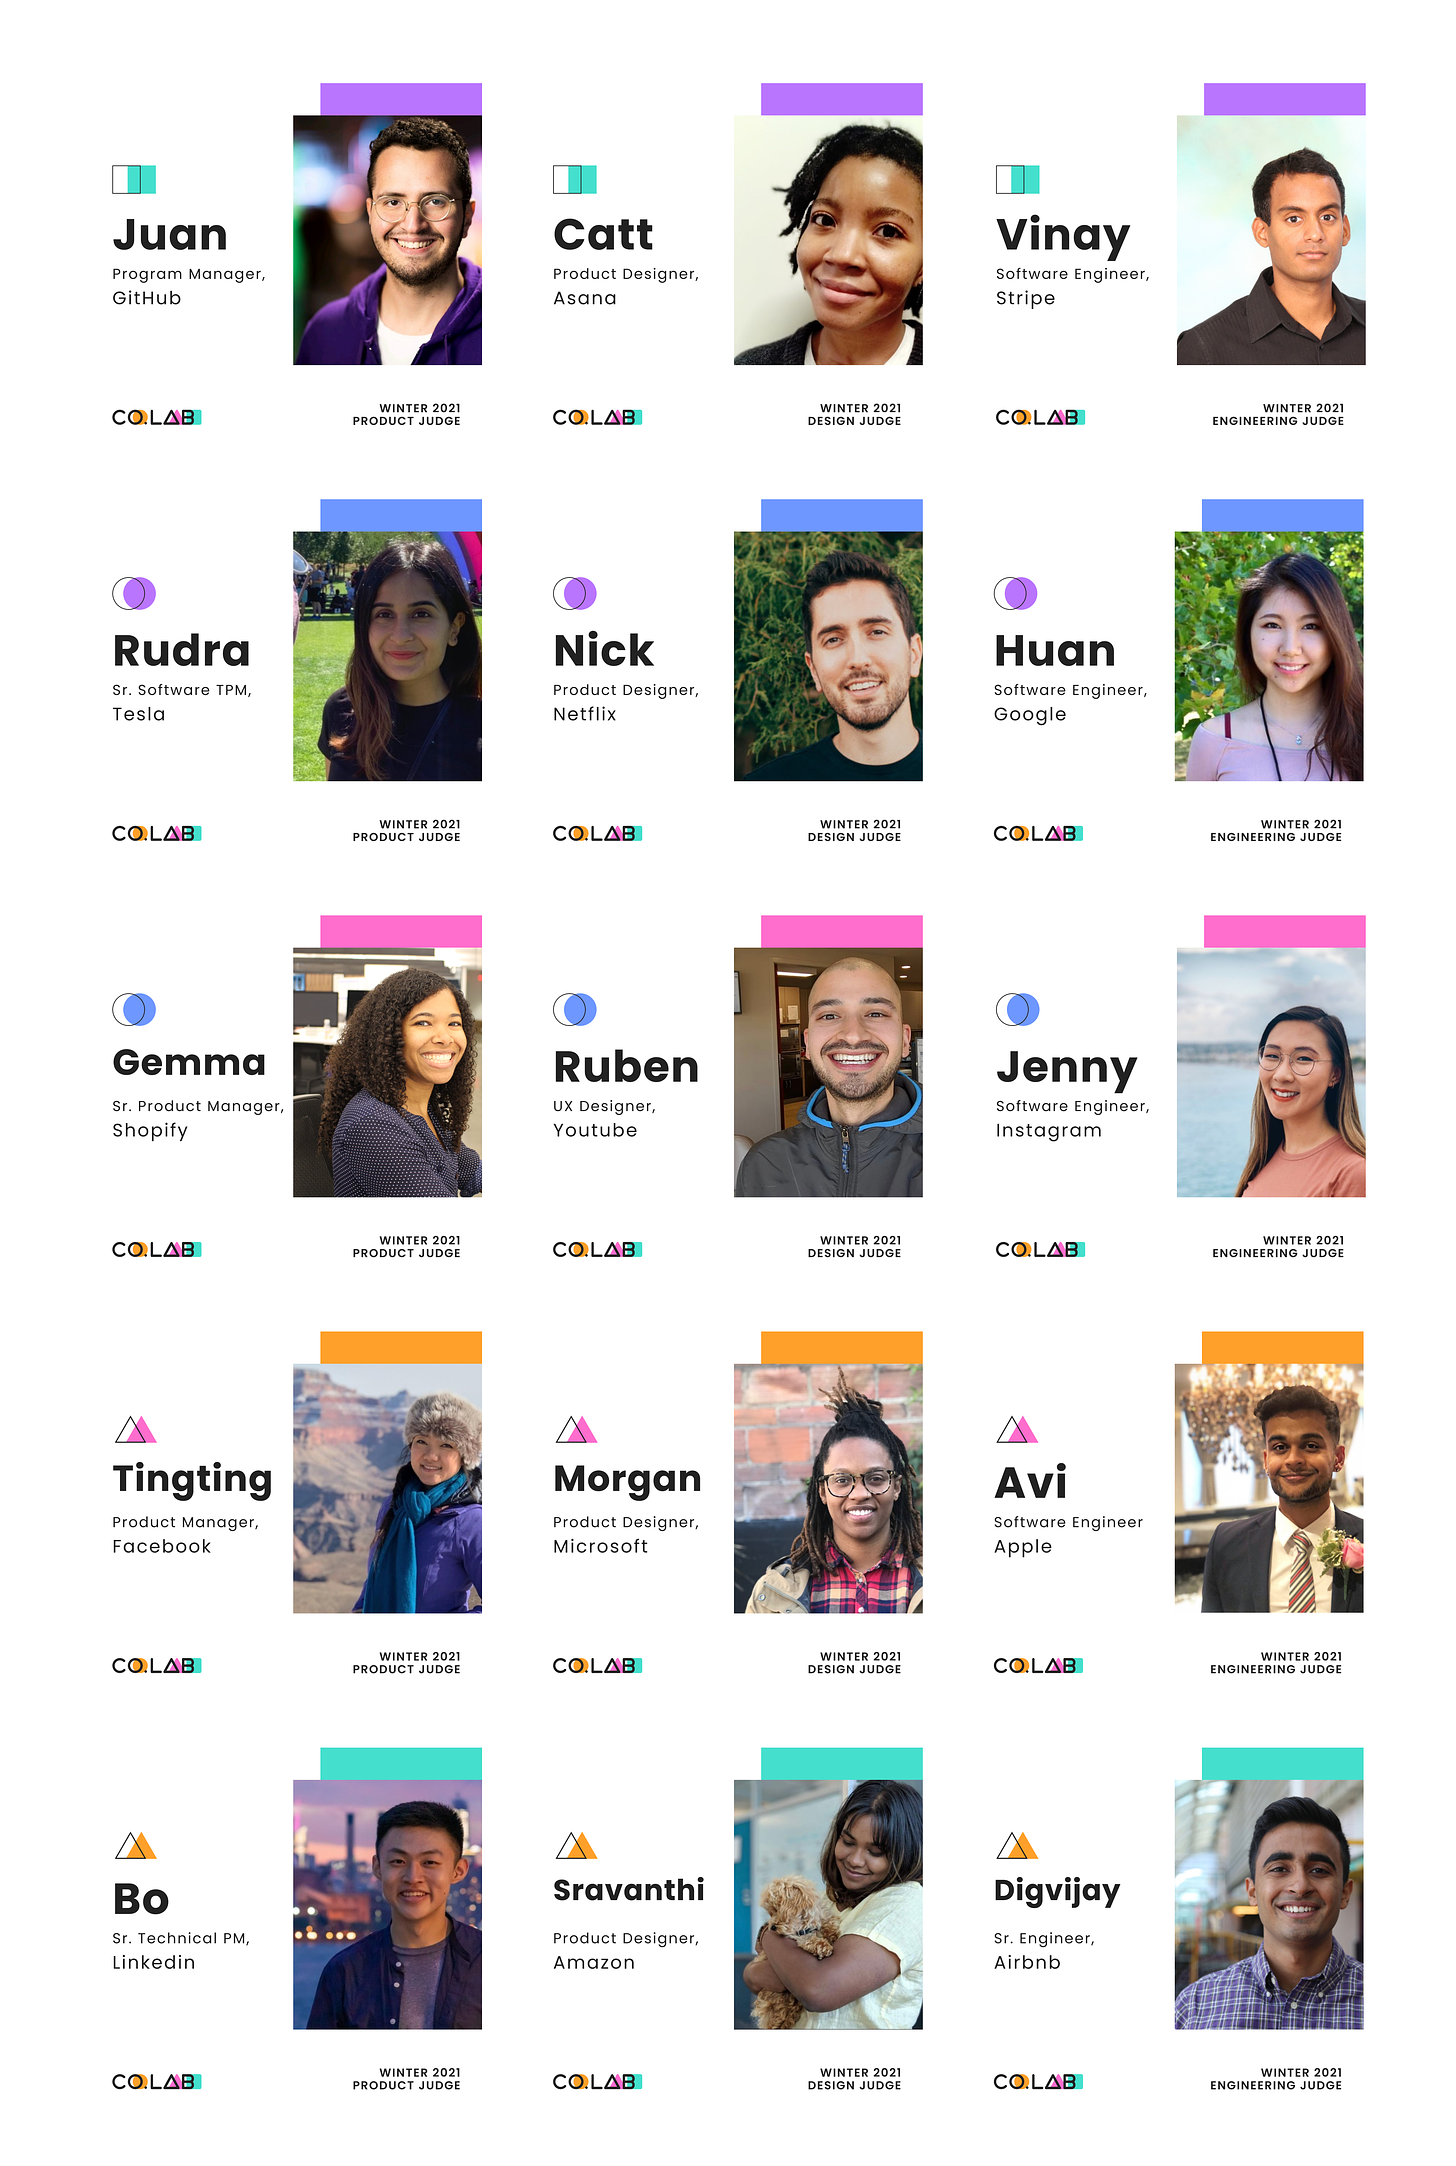 List of demo day judges with headshot photos